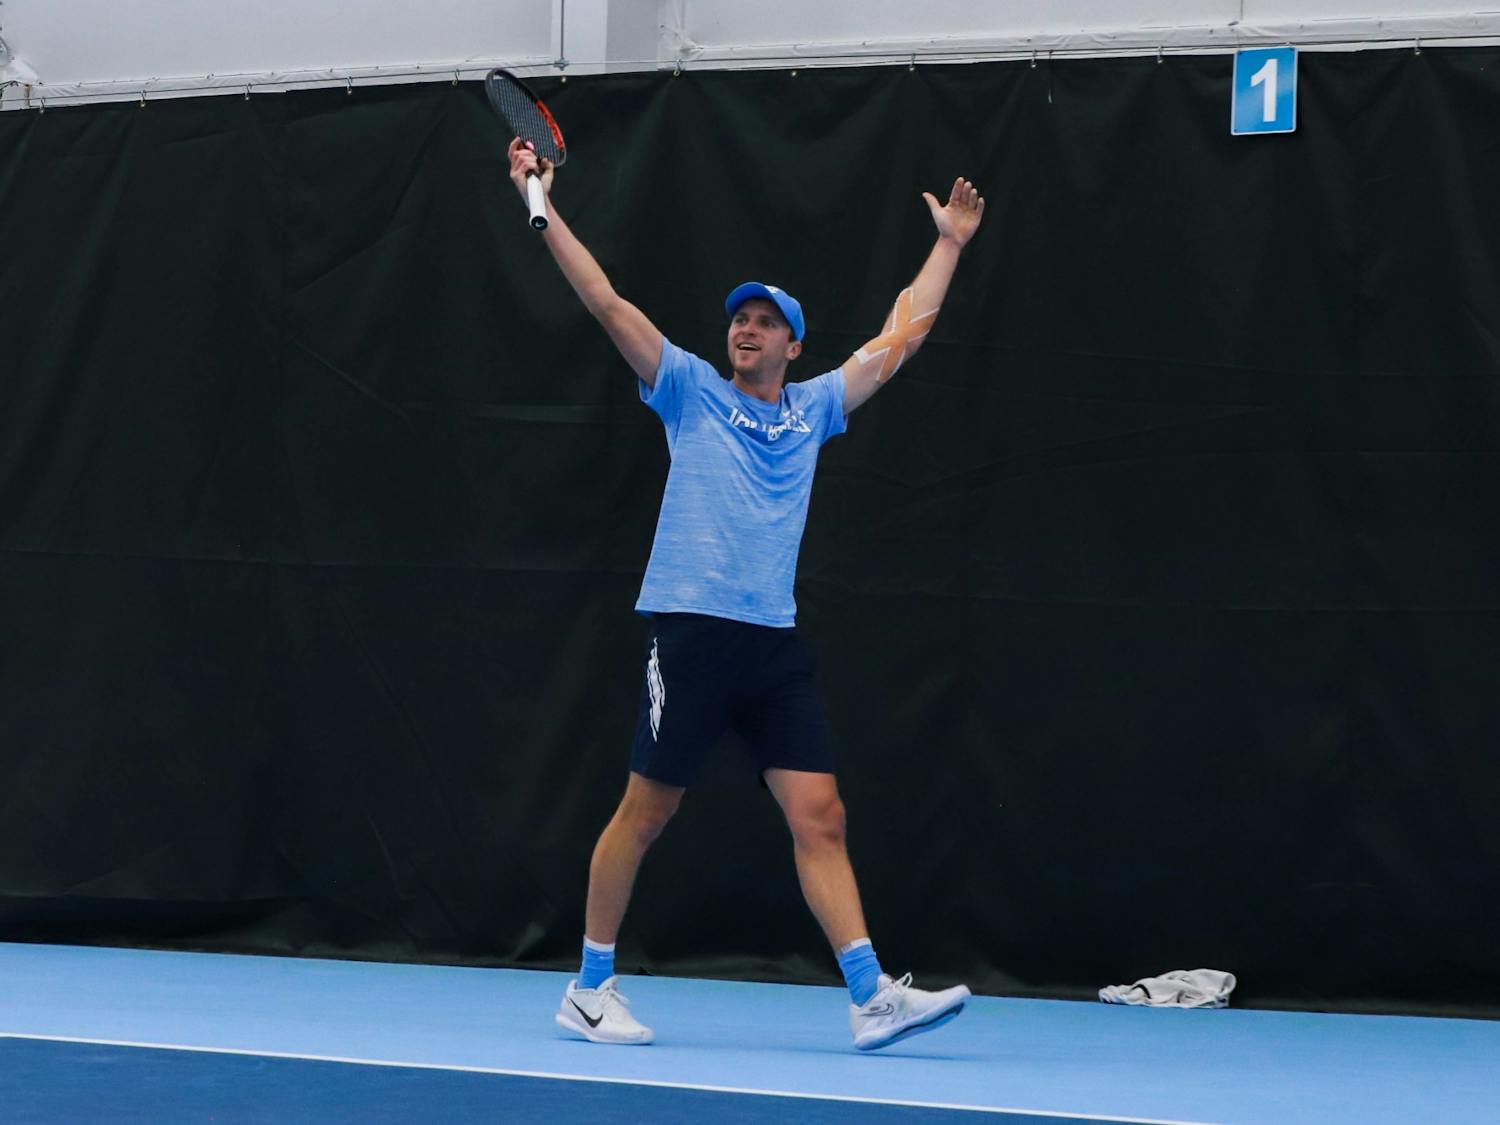 UNC graduate men's tennis player Brian Cernoch celebrates a point against Harvard on Sunday, January 29, 2023, at the Cone-Kenfield Tennis Center. UNC beat Harvard 4-1, winning the team a ticket to Chicago.